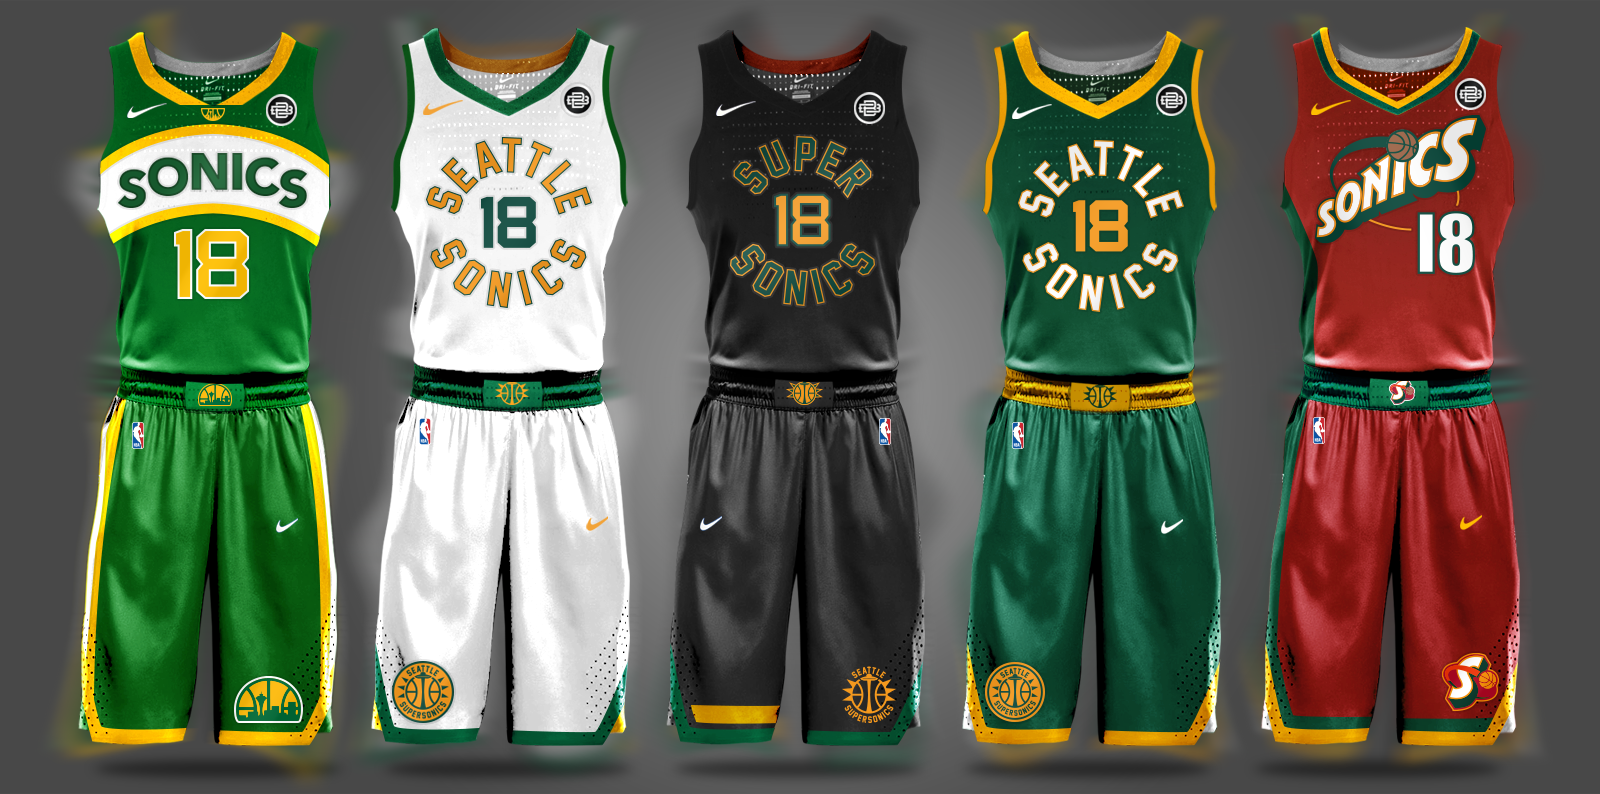 Future, Diplomats & Others Redesign Their Hometown NBA Jerseys